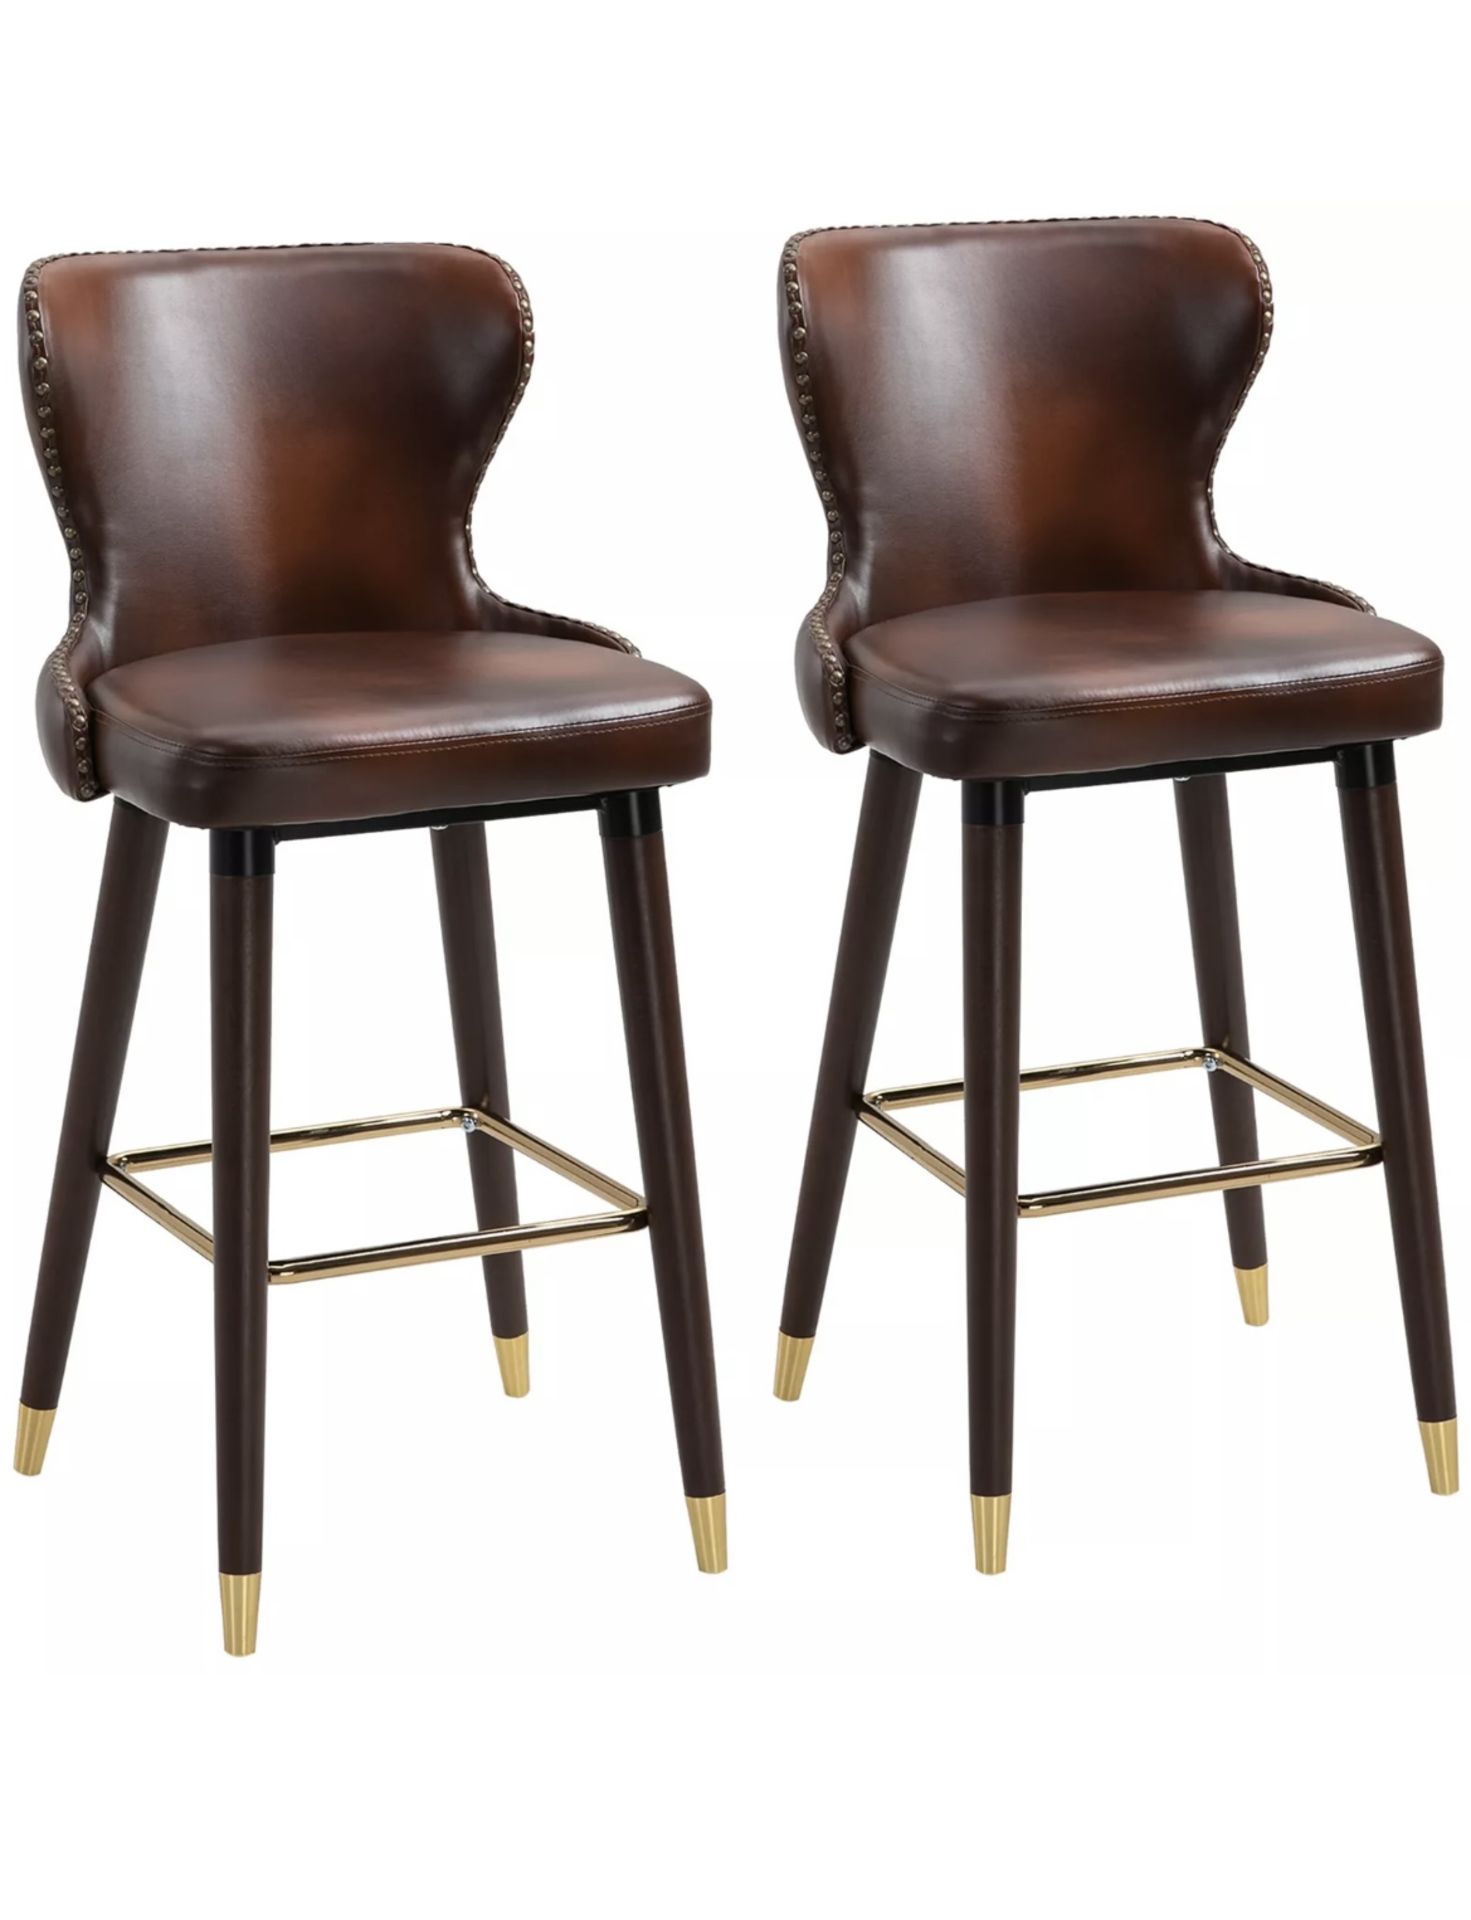 LUXURY SOLID BAR STOOLS SET OF 2 WITH BACK, PU LEATHER UPHOLSTERY, BROWN